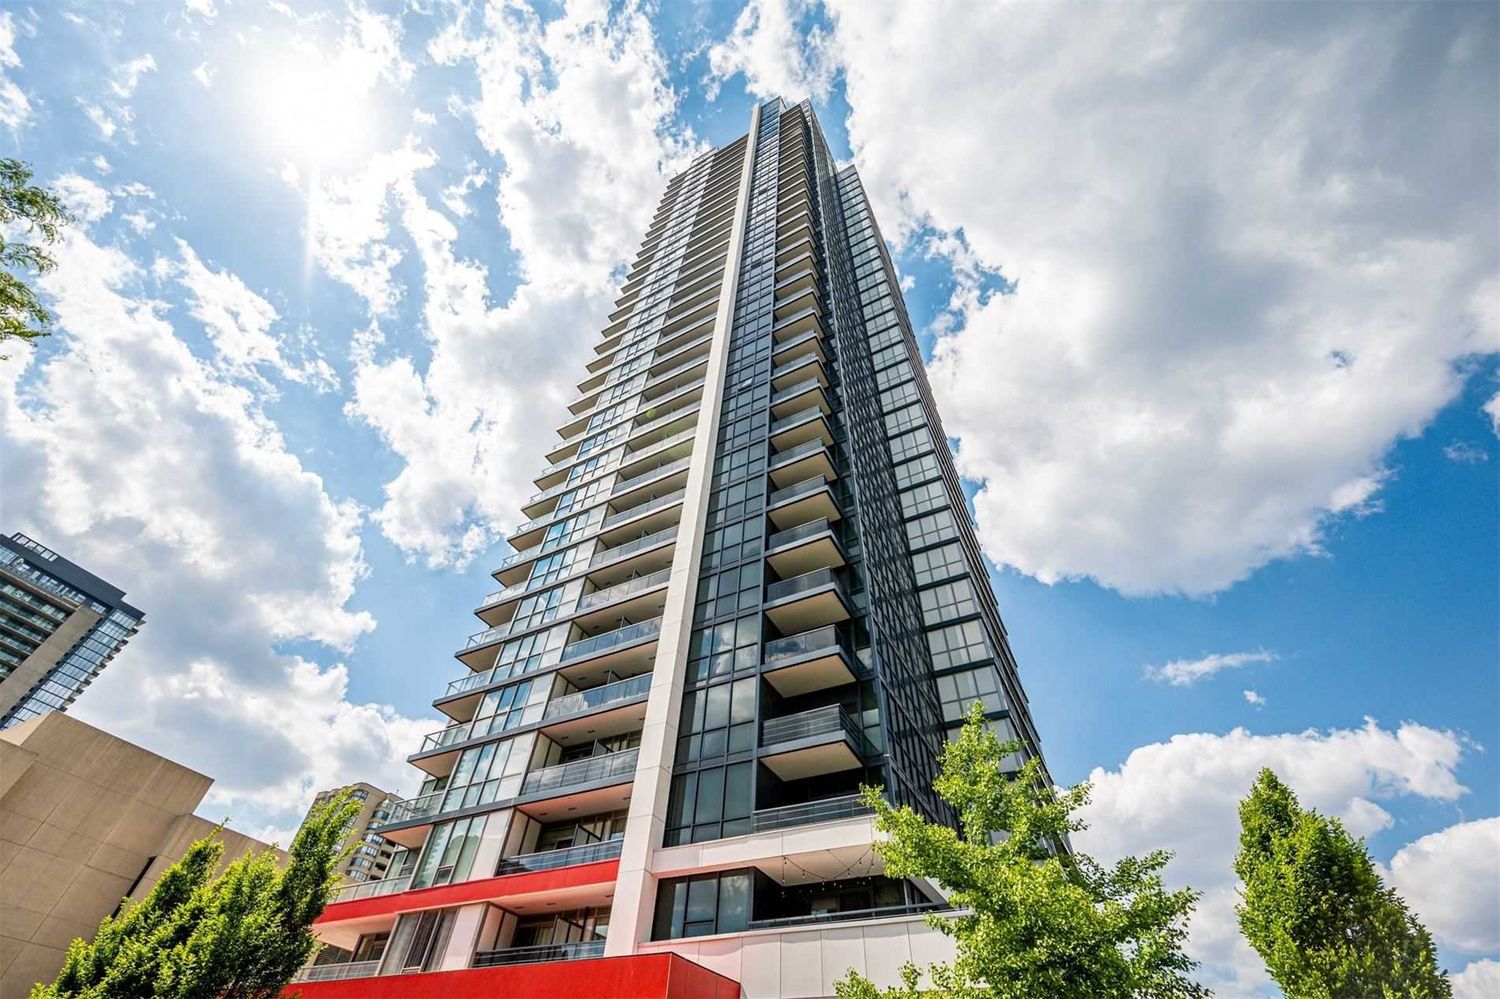 88 Sheppard Avenue E. EI8HTY8 Condos is located in  North York, Toronto - image #3 of 3